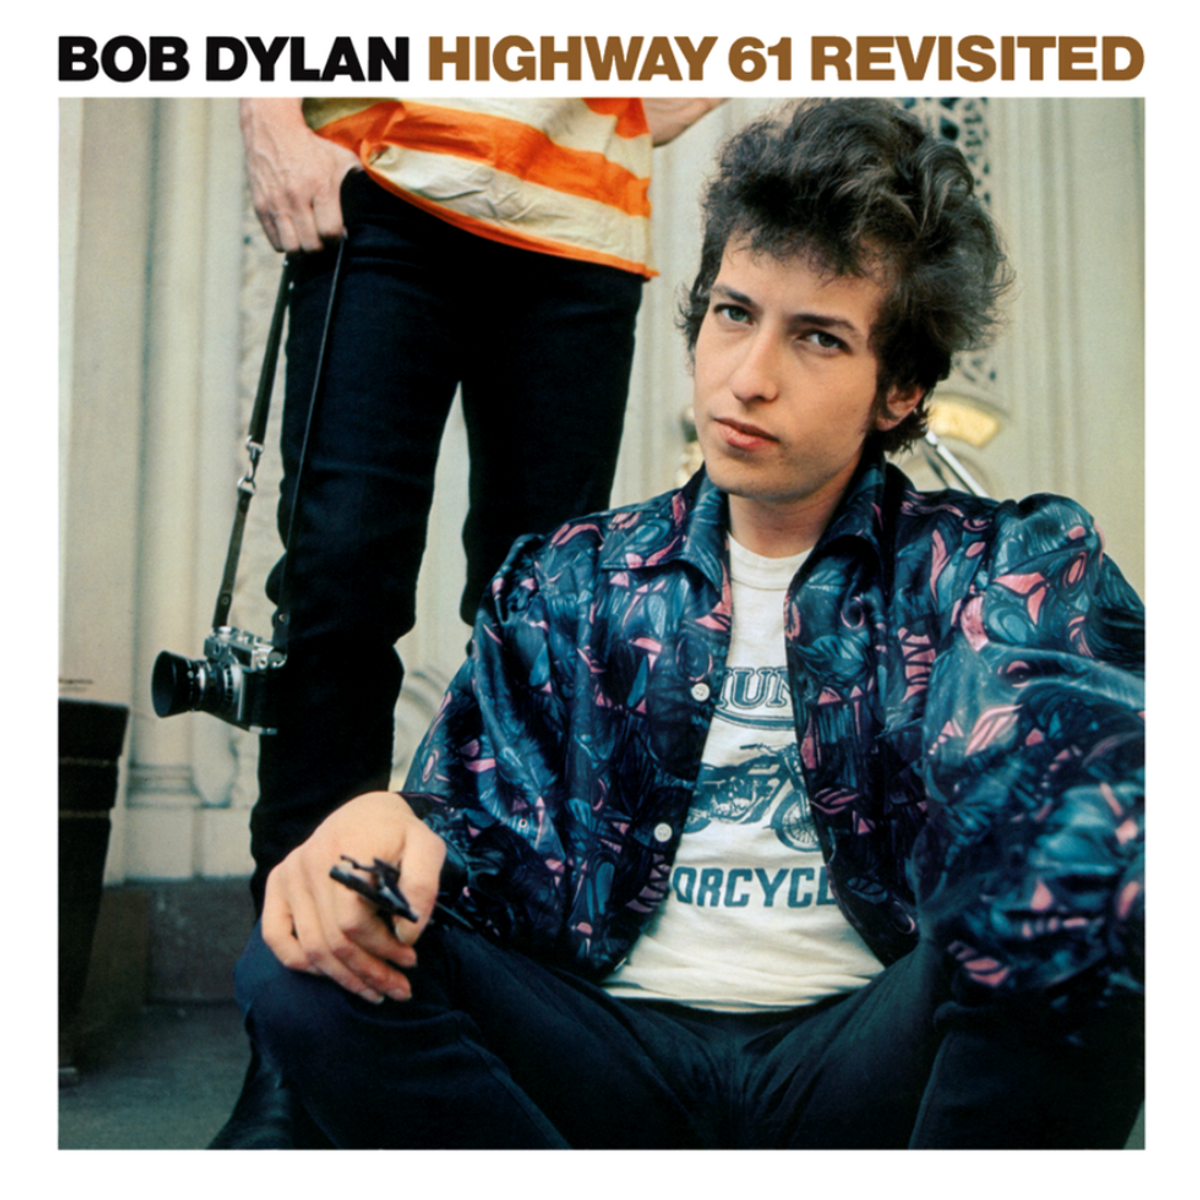 Bob Dylan's Highway 61 Revisited: A Review